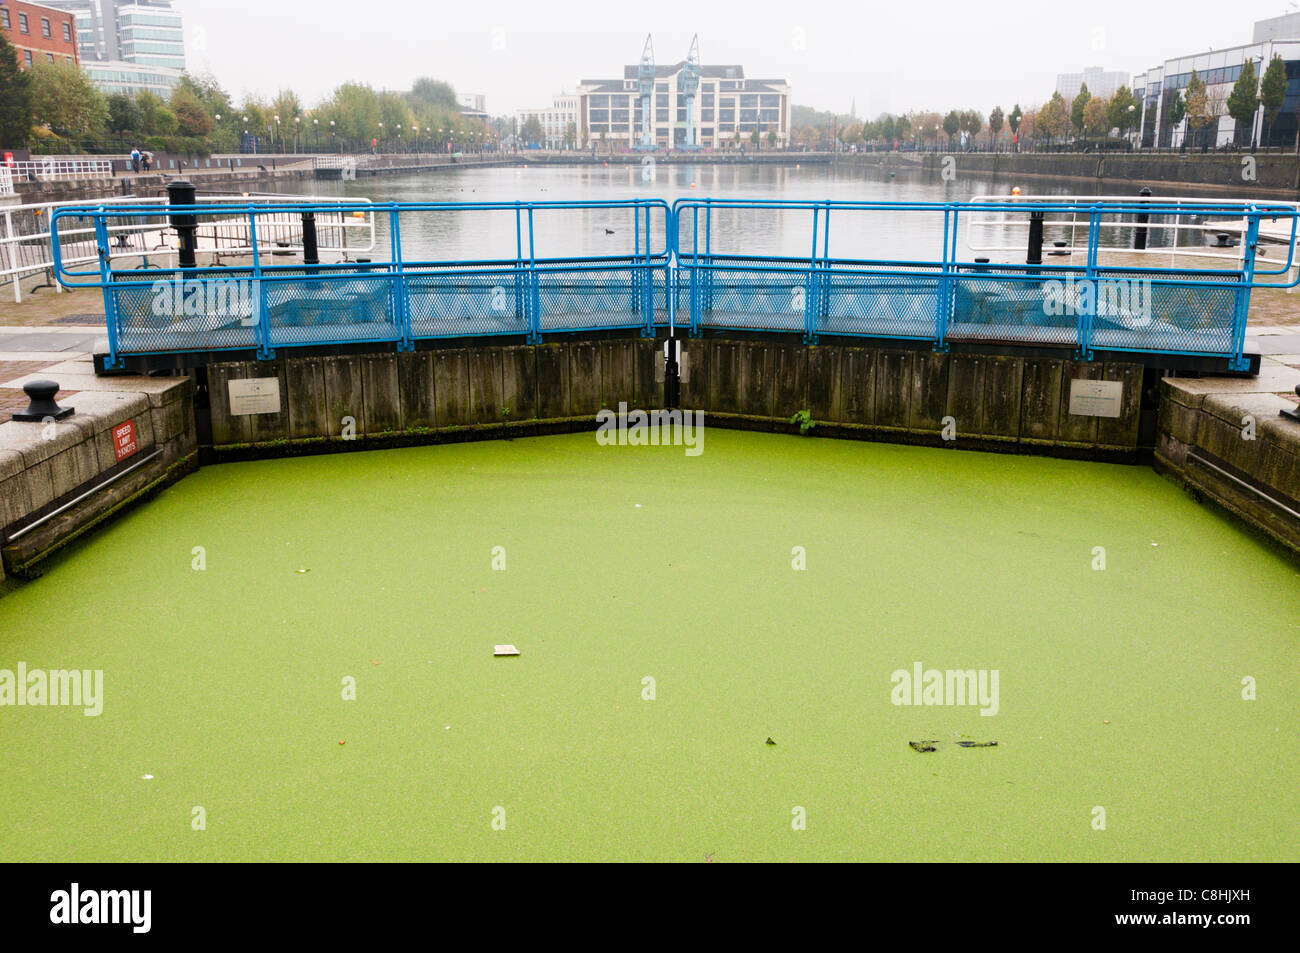 Duckweed in the Welland lock entrance to Ontario Basin, Salford Quays, Manchester Stock Photo